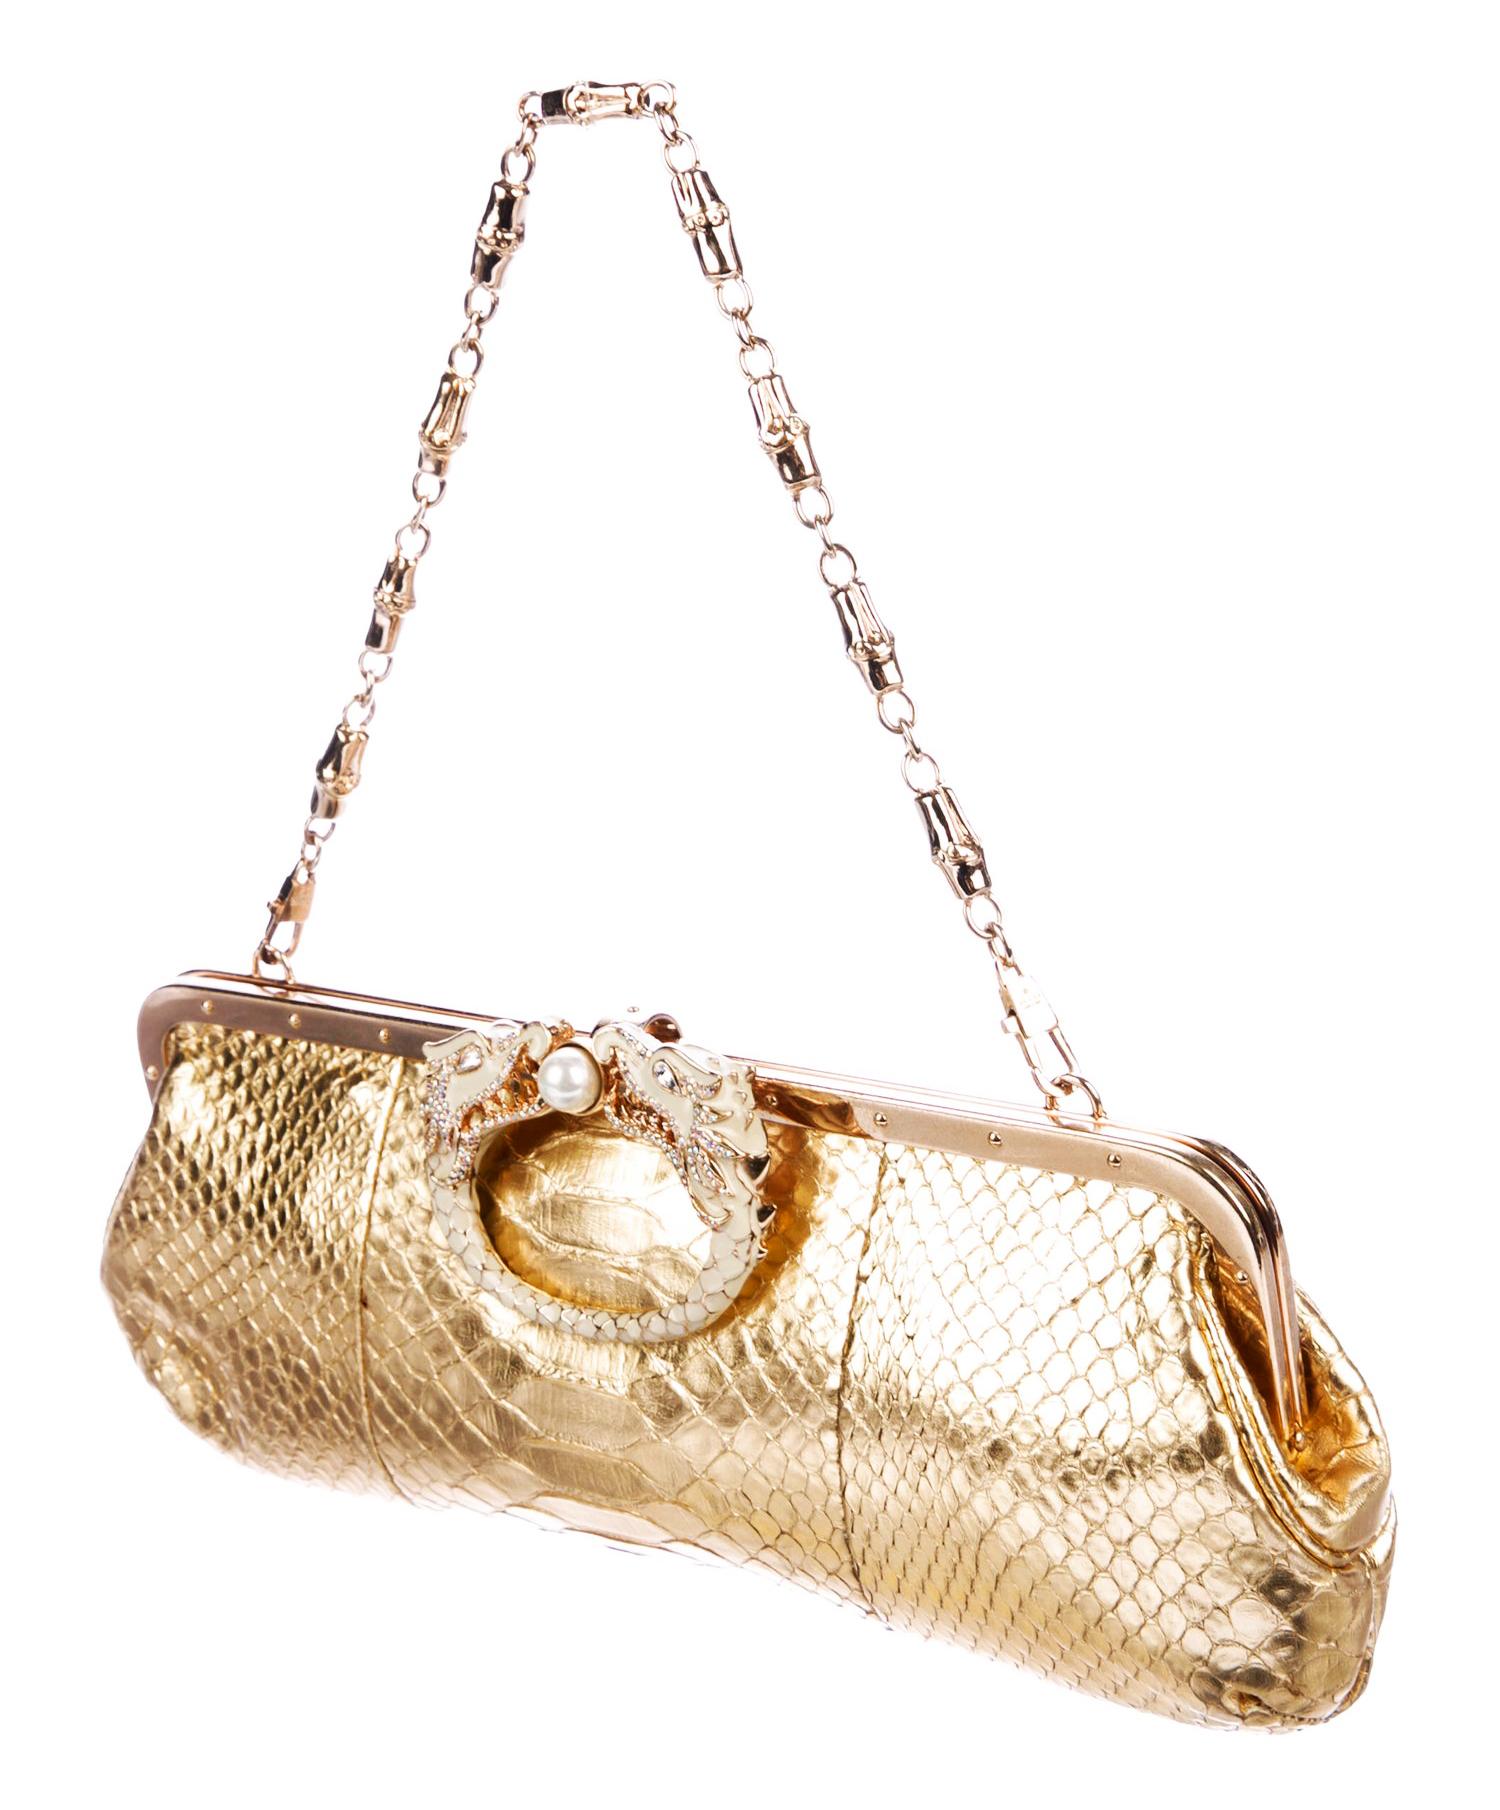 Rare Tom Ford for Gucci Limited Edition Gold Python Bag Clutch
F/W 2004 Collection
Made of Exotic Gold Colored Python with Large Detailed Enamel Handcrafted Jeweled Dragon Heads.  A Truly Luxurious and Elegant Piece.
Gold-tone Hardware, Detachable